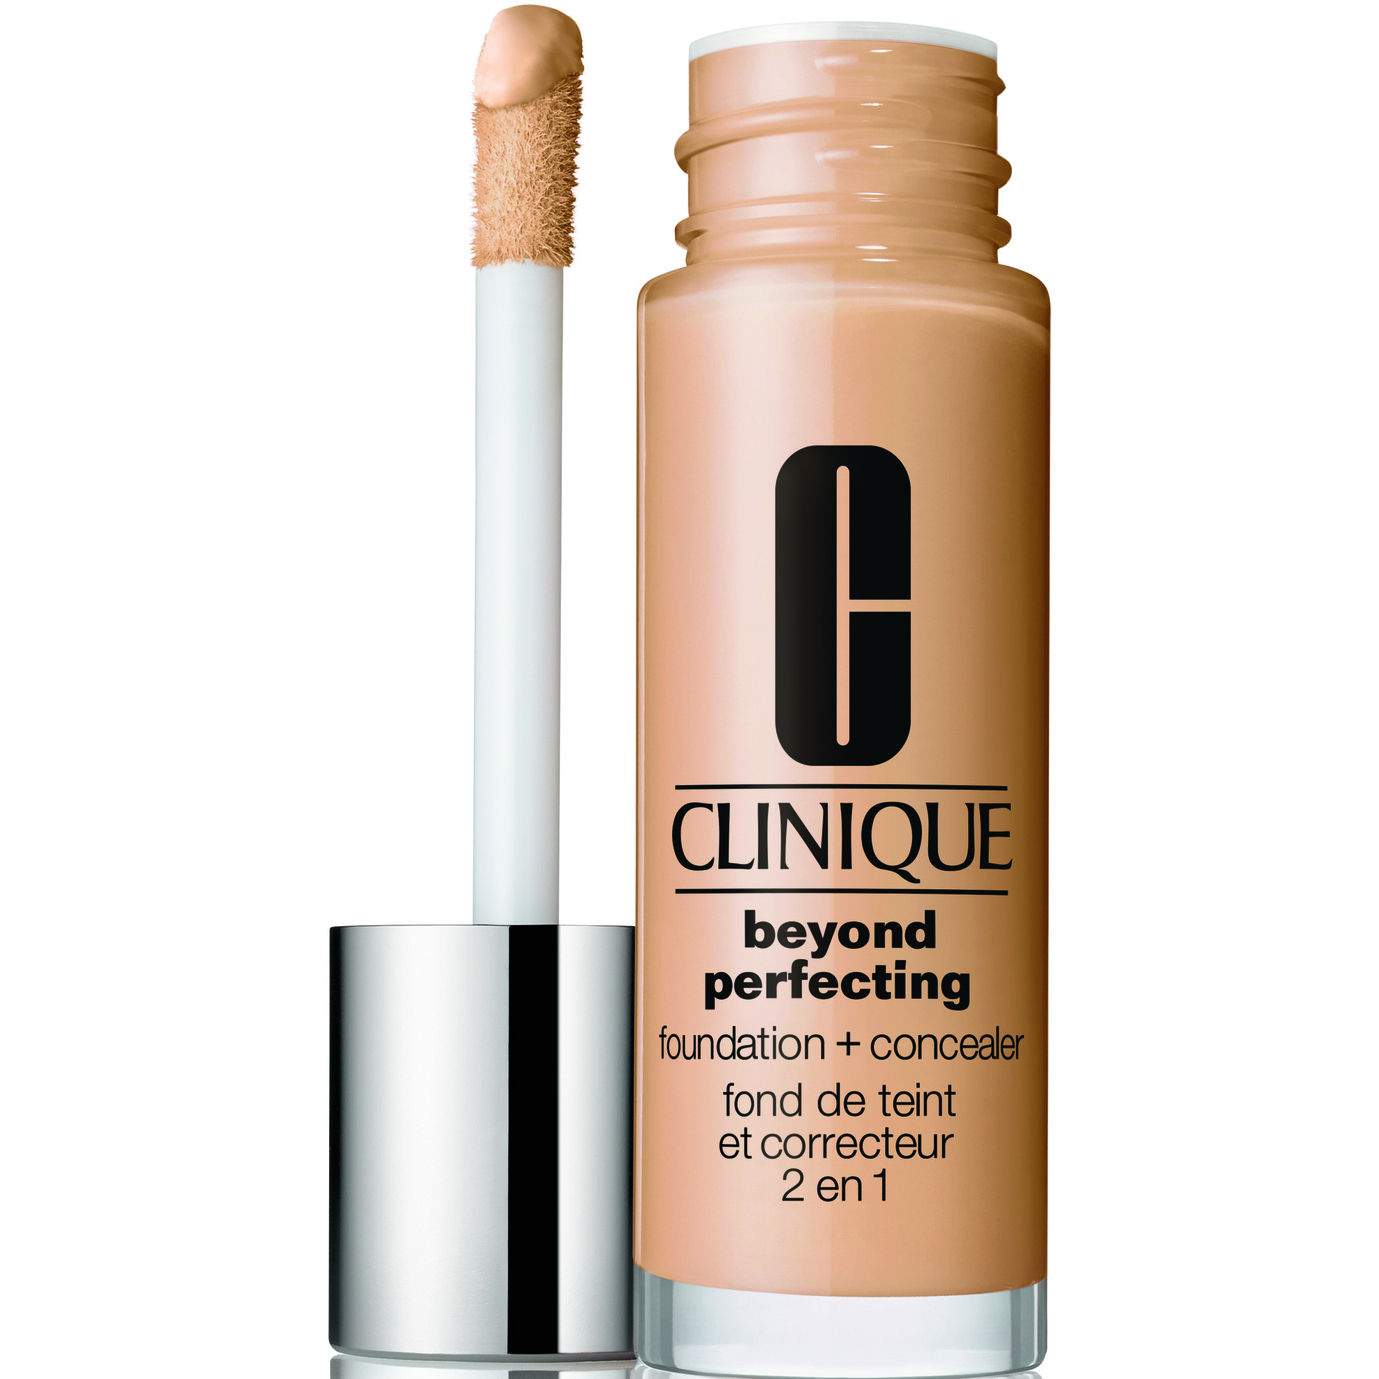 clinique-beyond-perfecting-foundation-concealer-all-types-foundation-30-ml-3